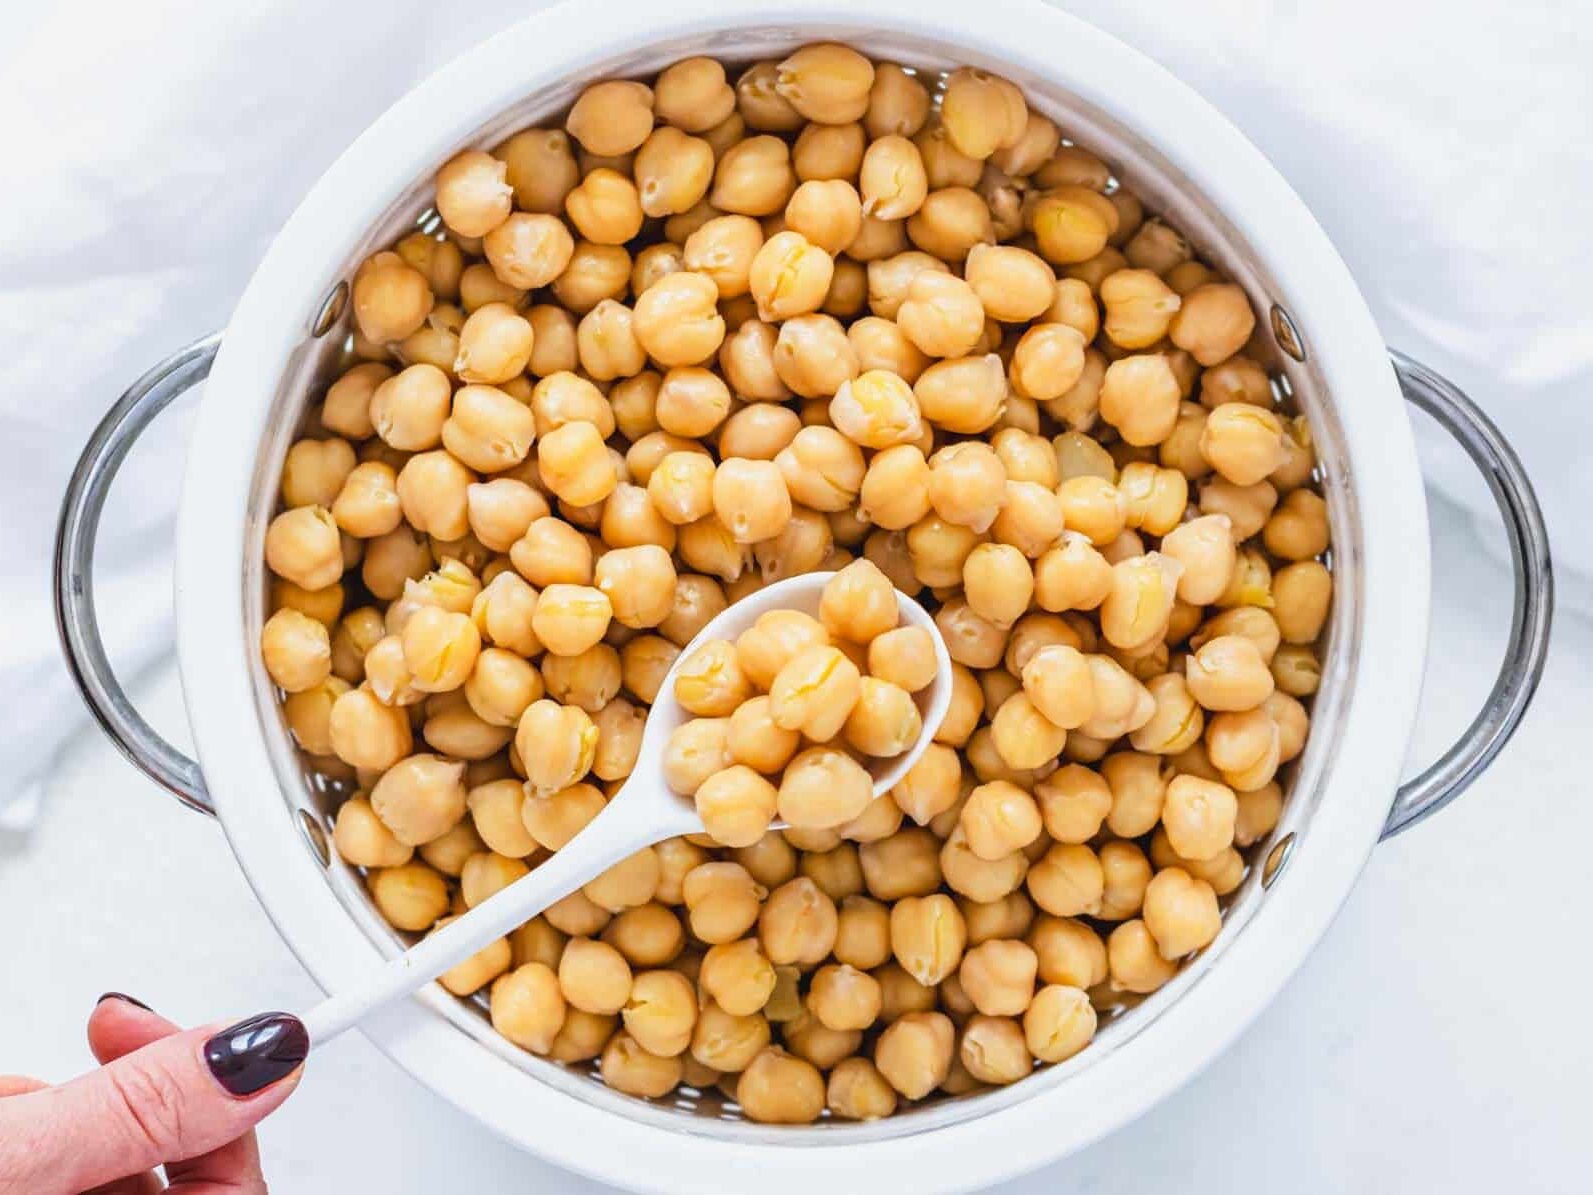 cooked tender chickpeas in a white sift with hand holding a white spoon